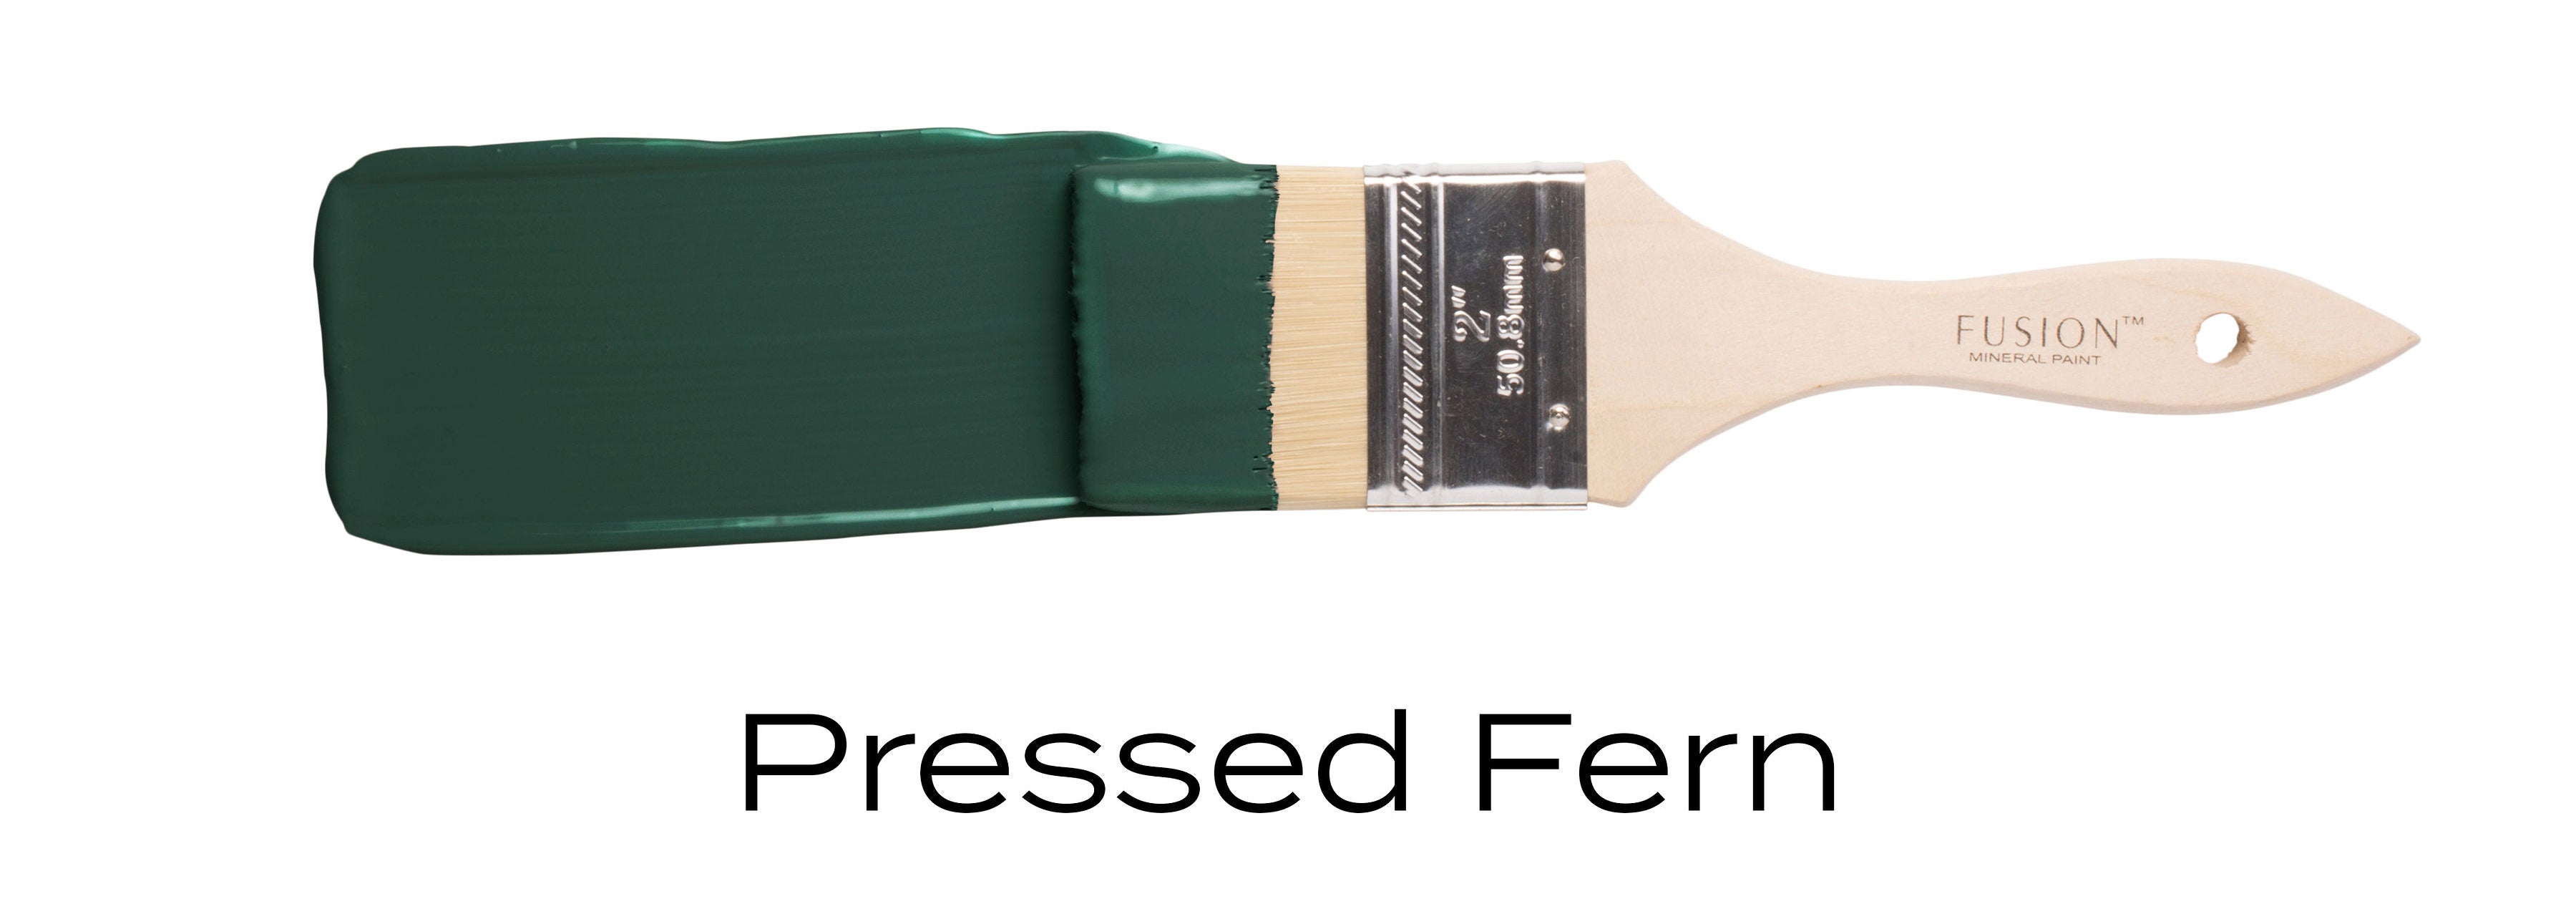 pressed fern dark green colour example on a brush stroke of fusion mineral paint vintage frog uk stockist.jpg